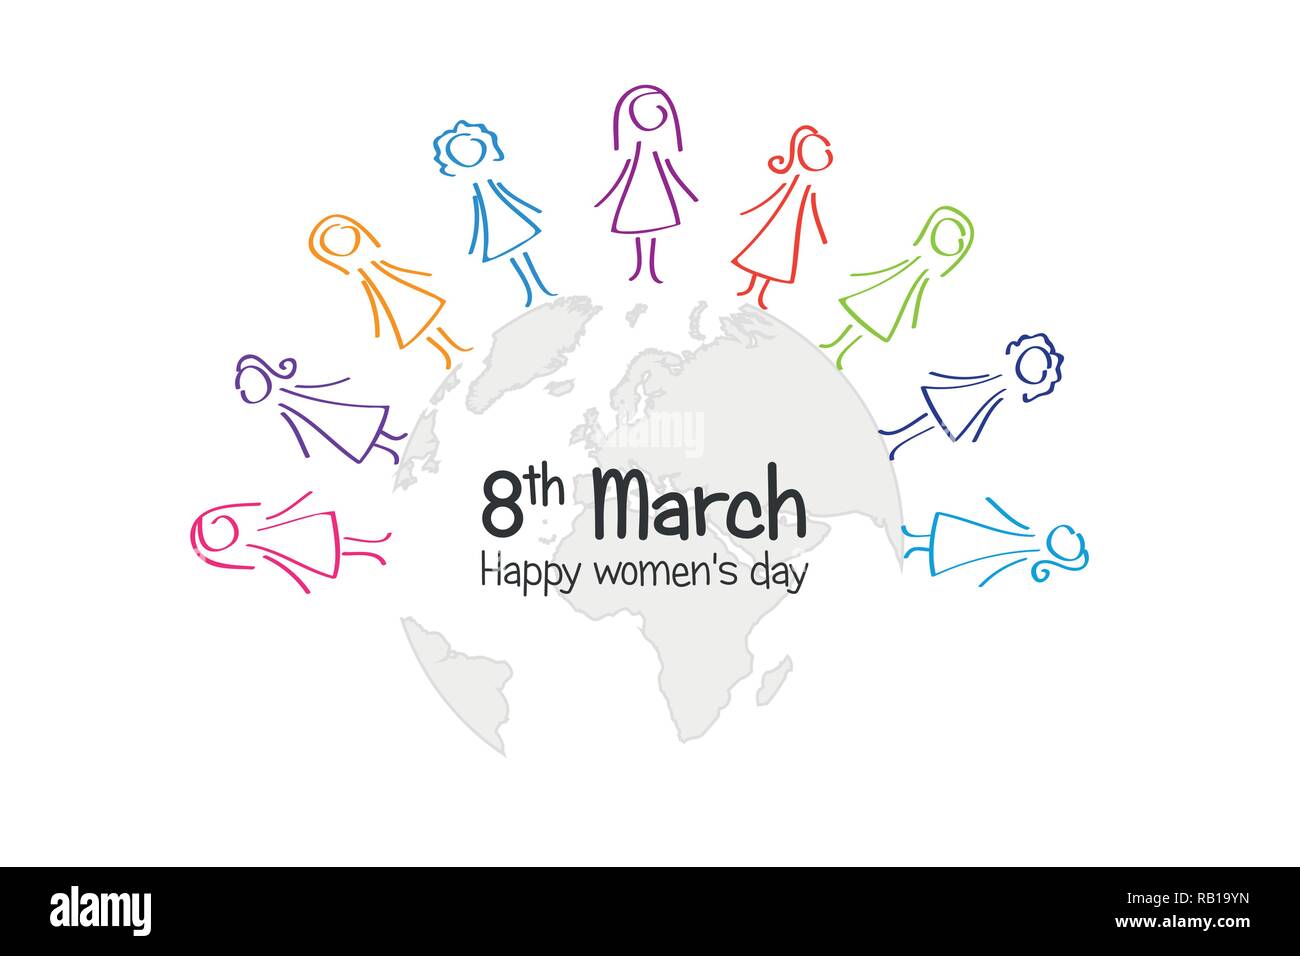 international women's day with colorful womans group around the world vector illustration EPS10 Stock Vector